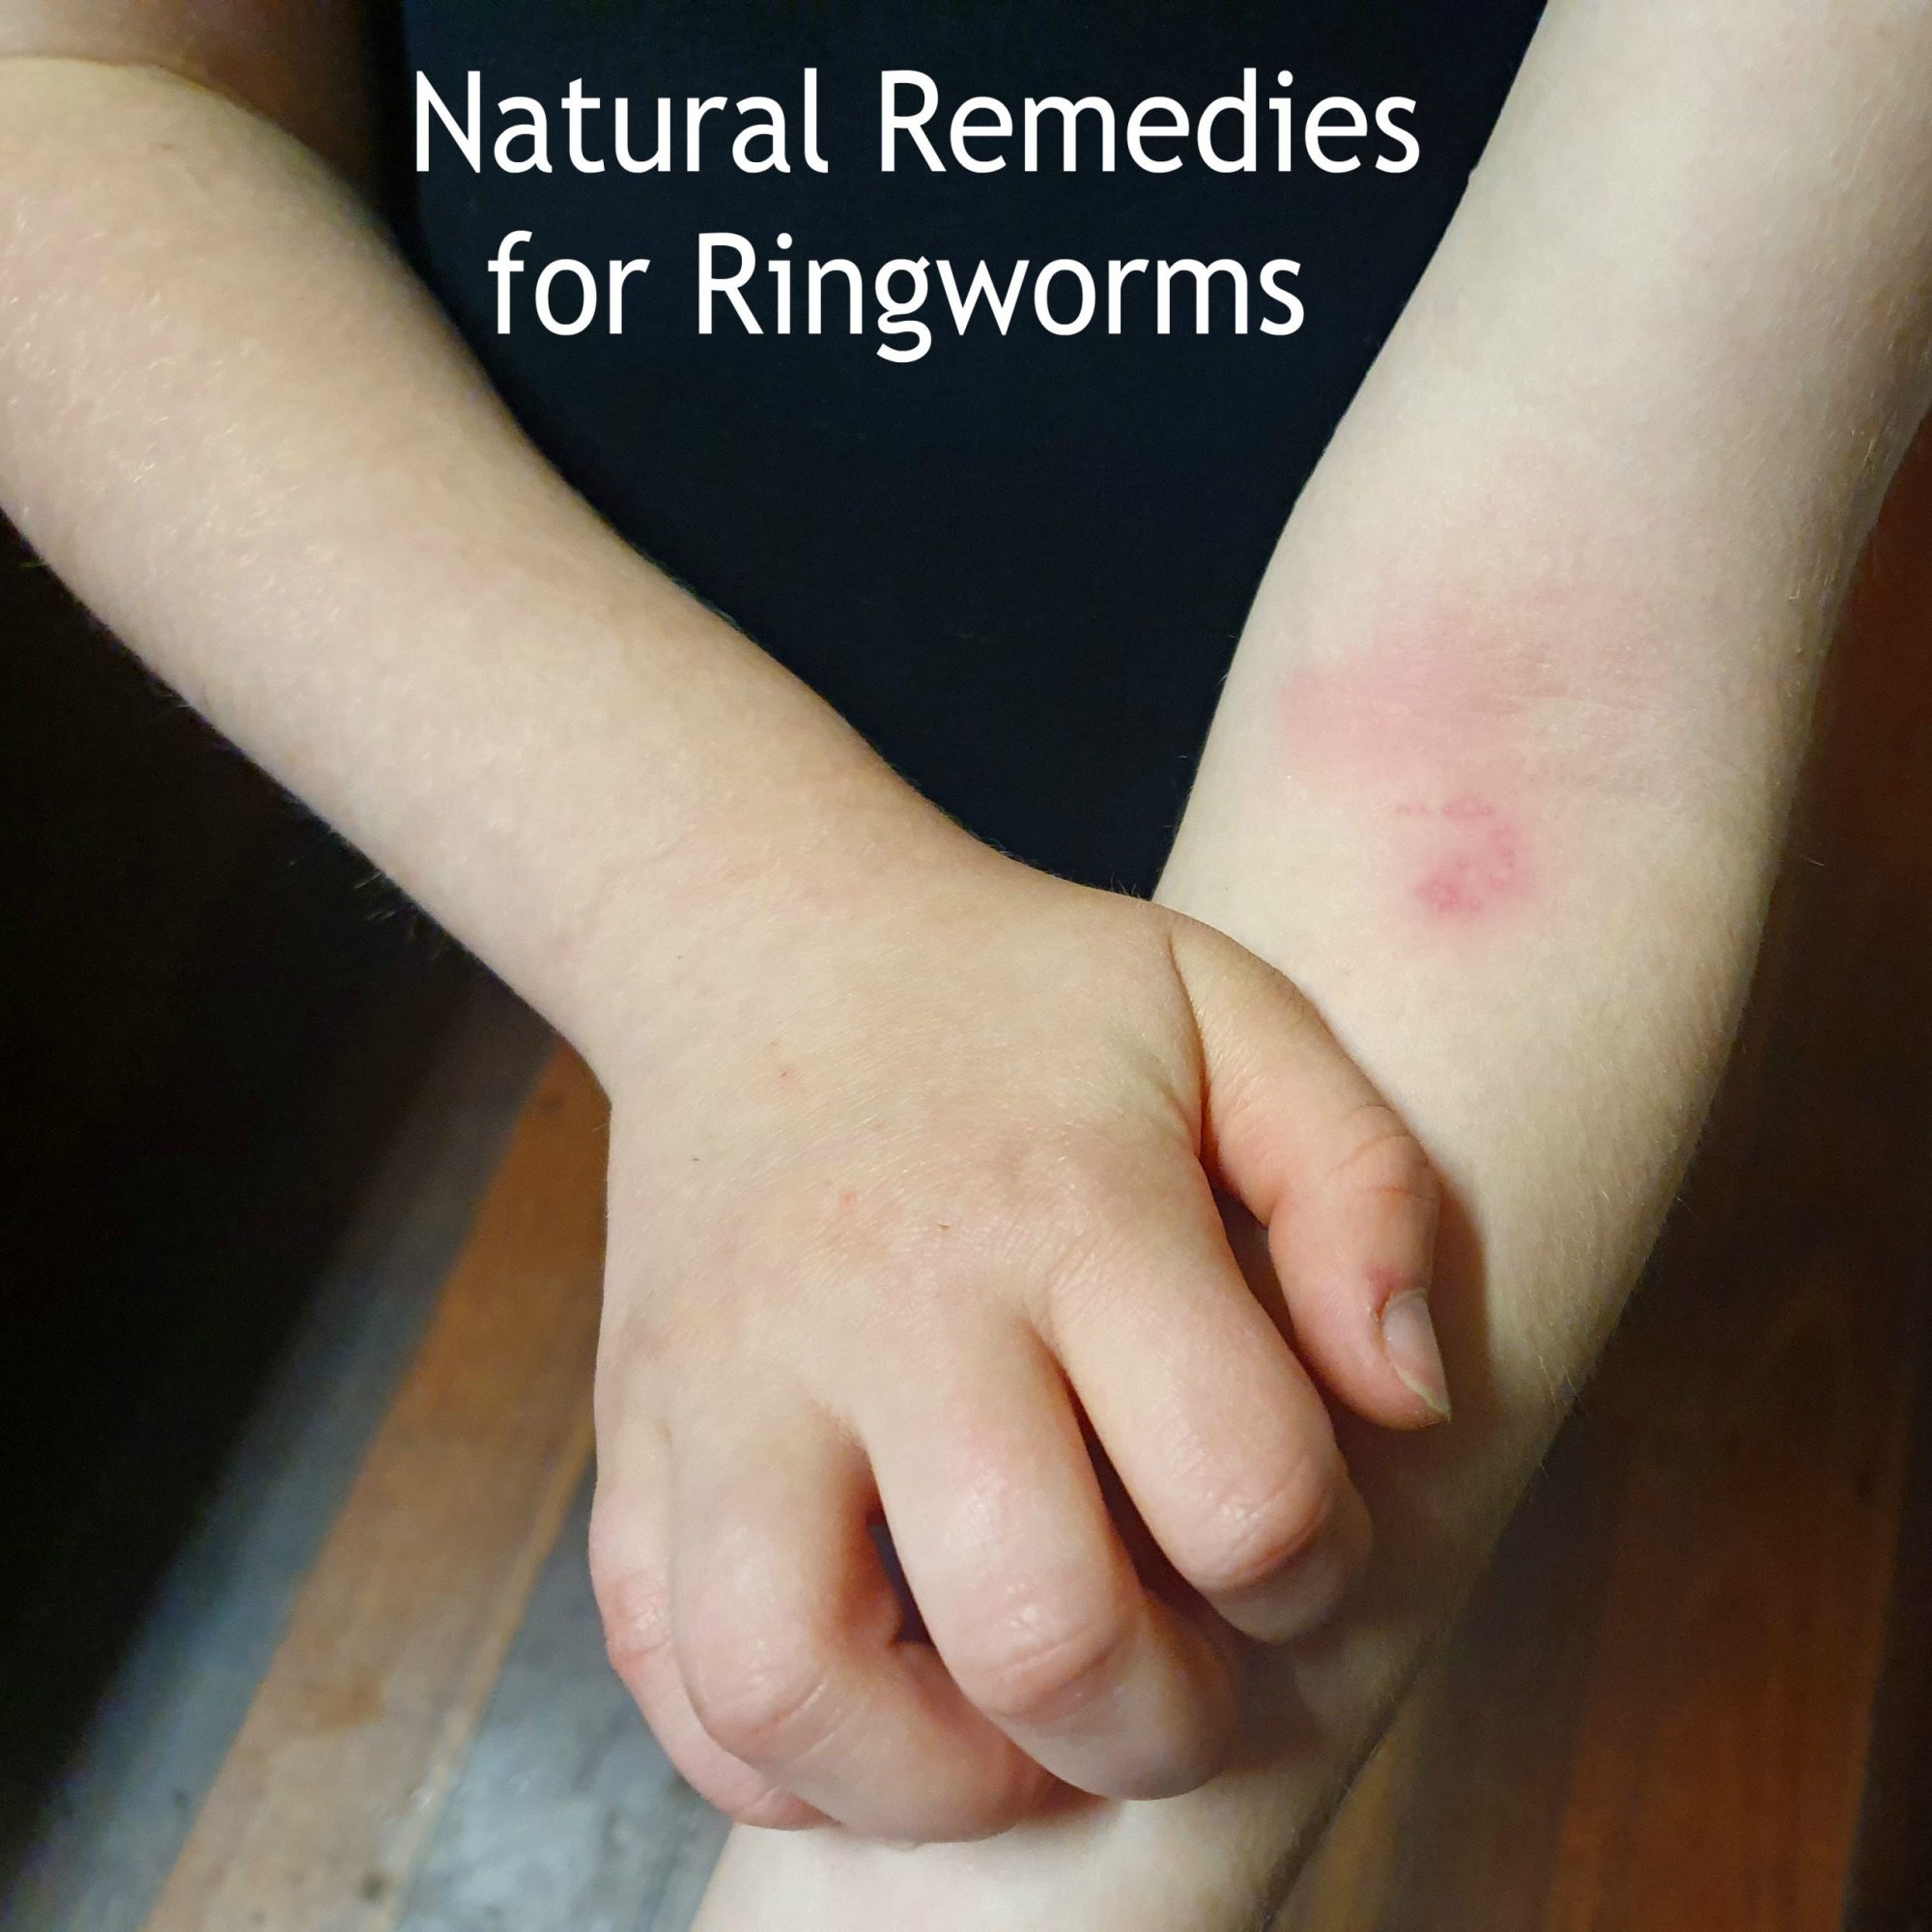 can a person get ringworm from a dog